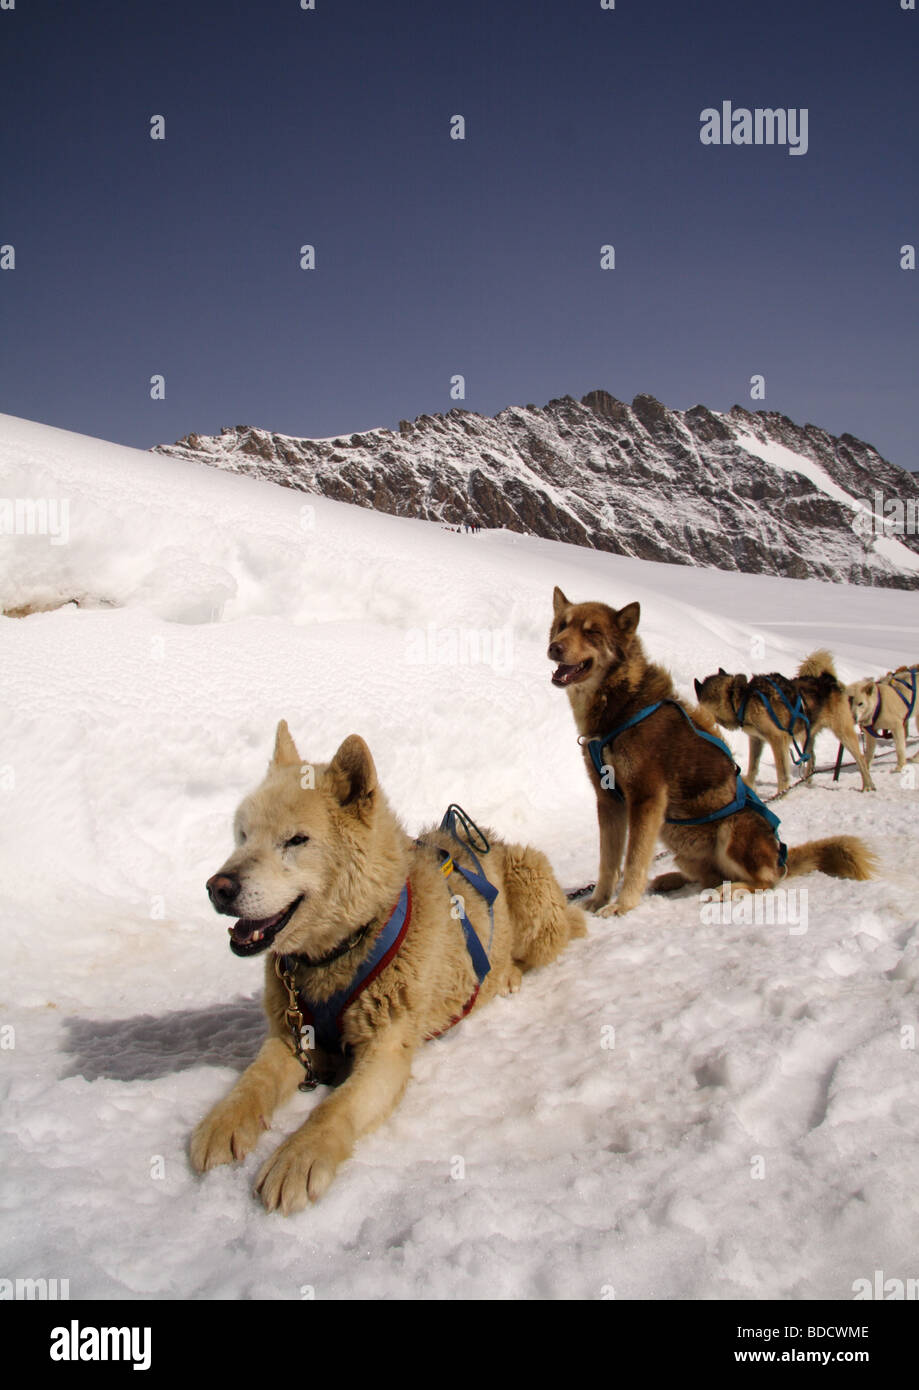 Schlittenhund High Resolution Stock Photography and Images - Alamy